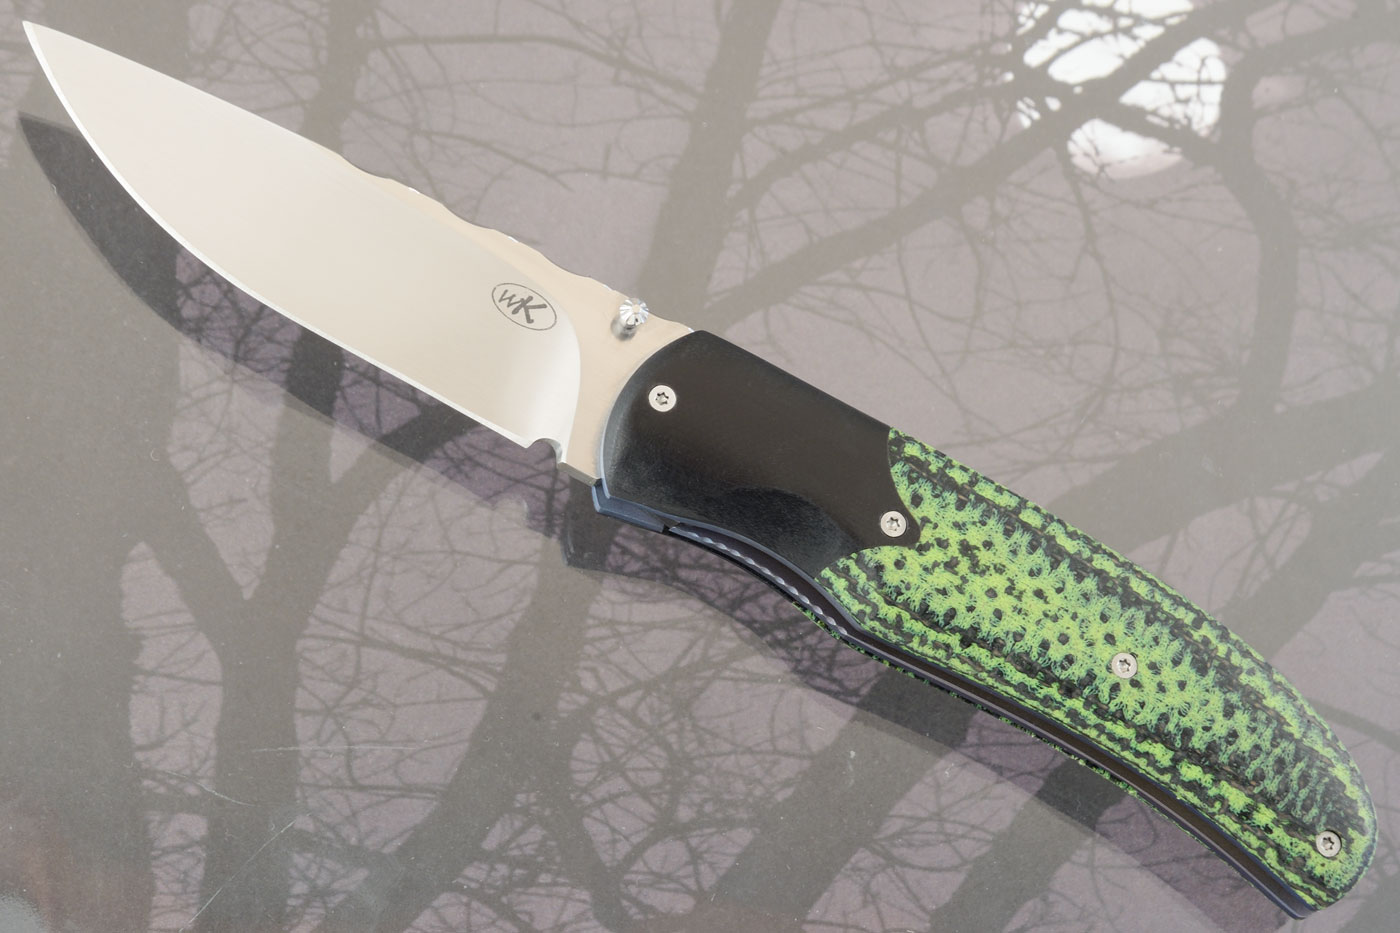 Ratel with Green/Black Carbon Fiber and G10